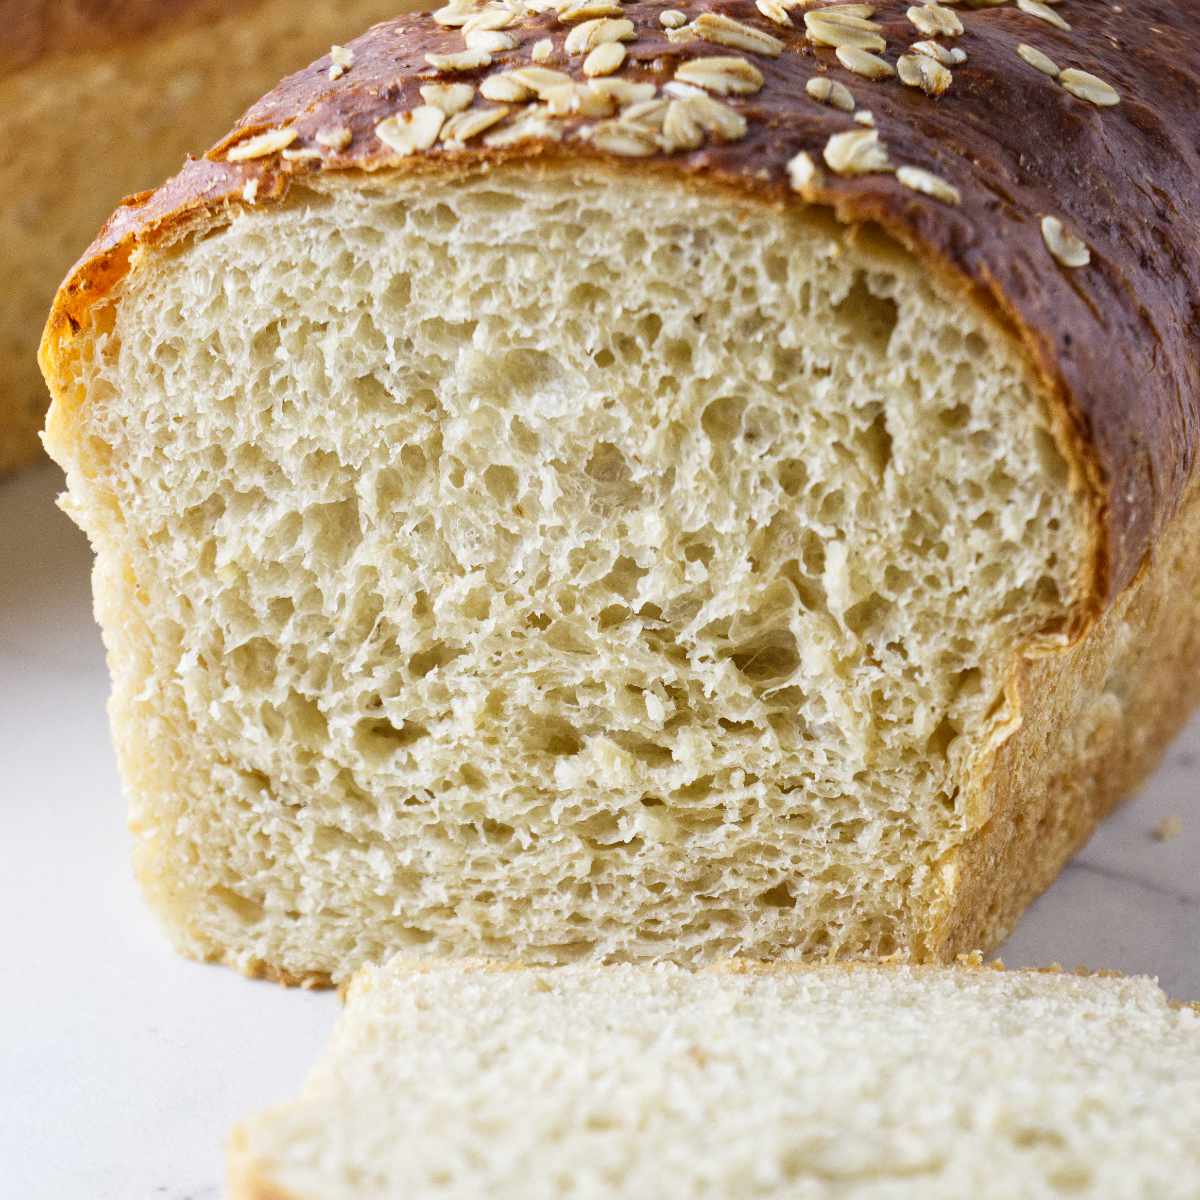 A loaf of oatmeal bread sliced in half to show the interior crumb.